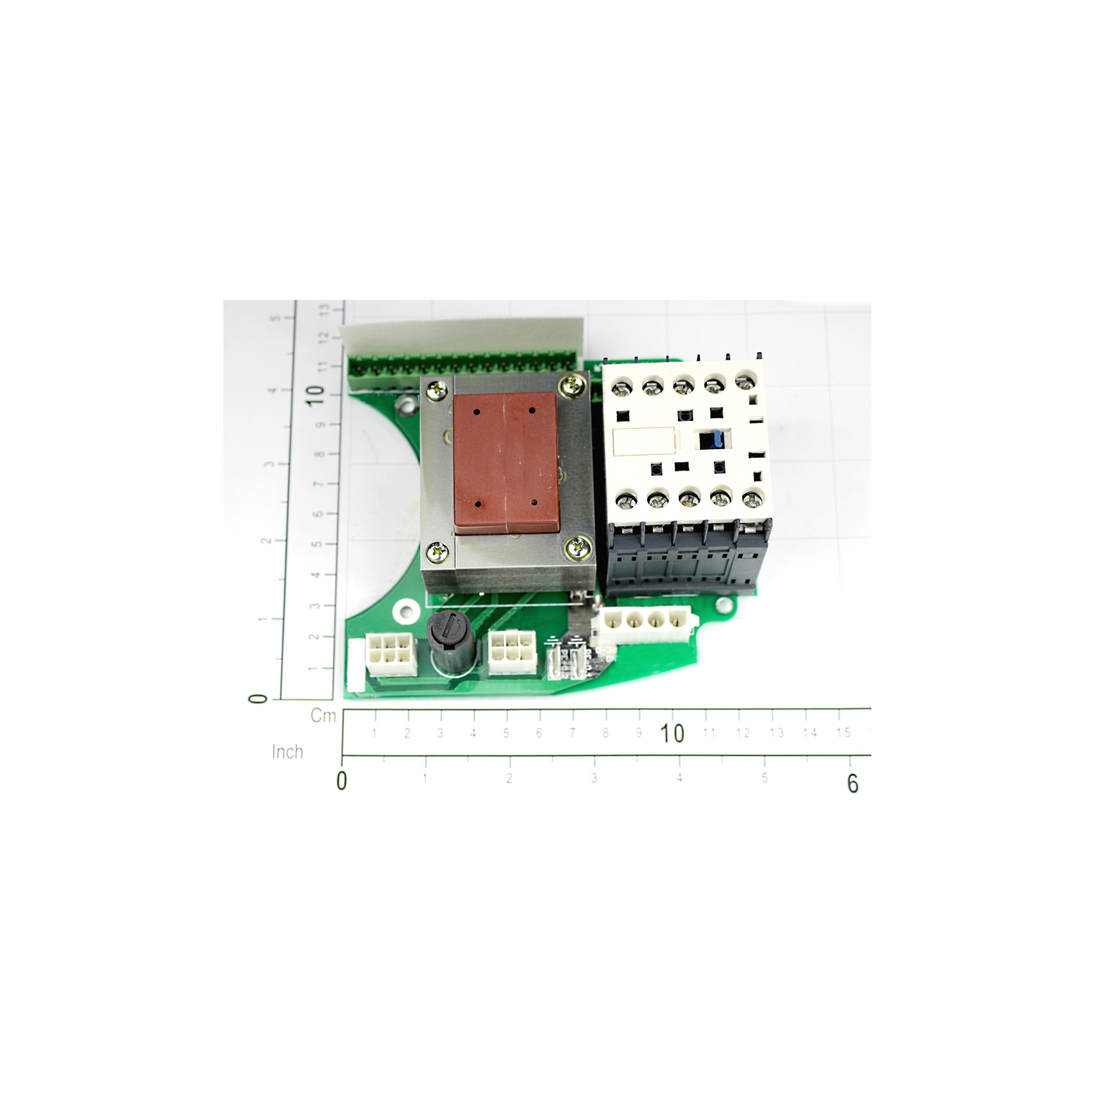 R&M Parts - Power Supply Board, Part Number: 3000006496